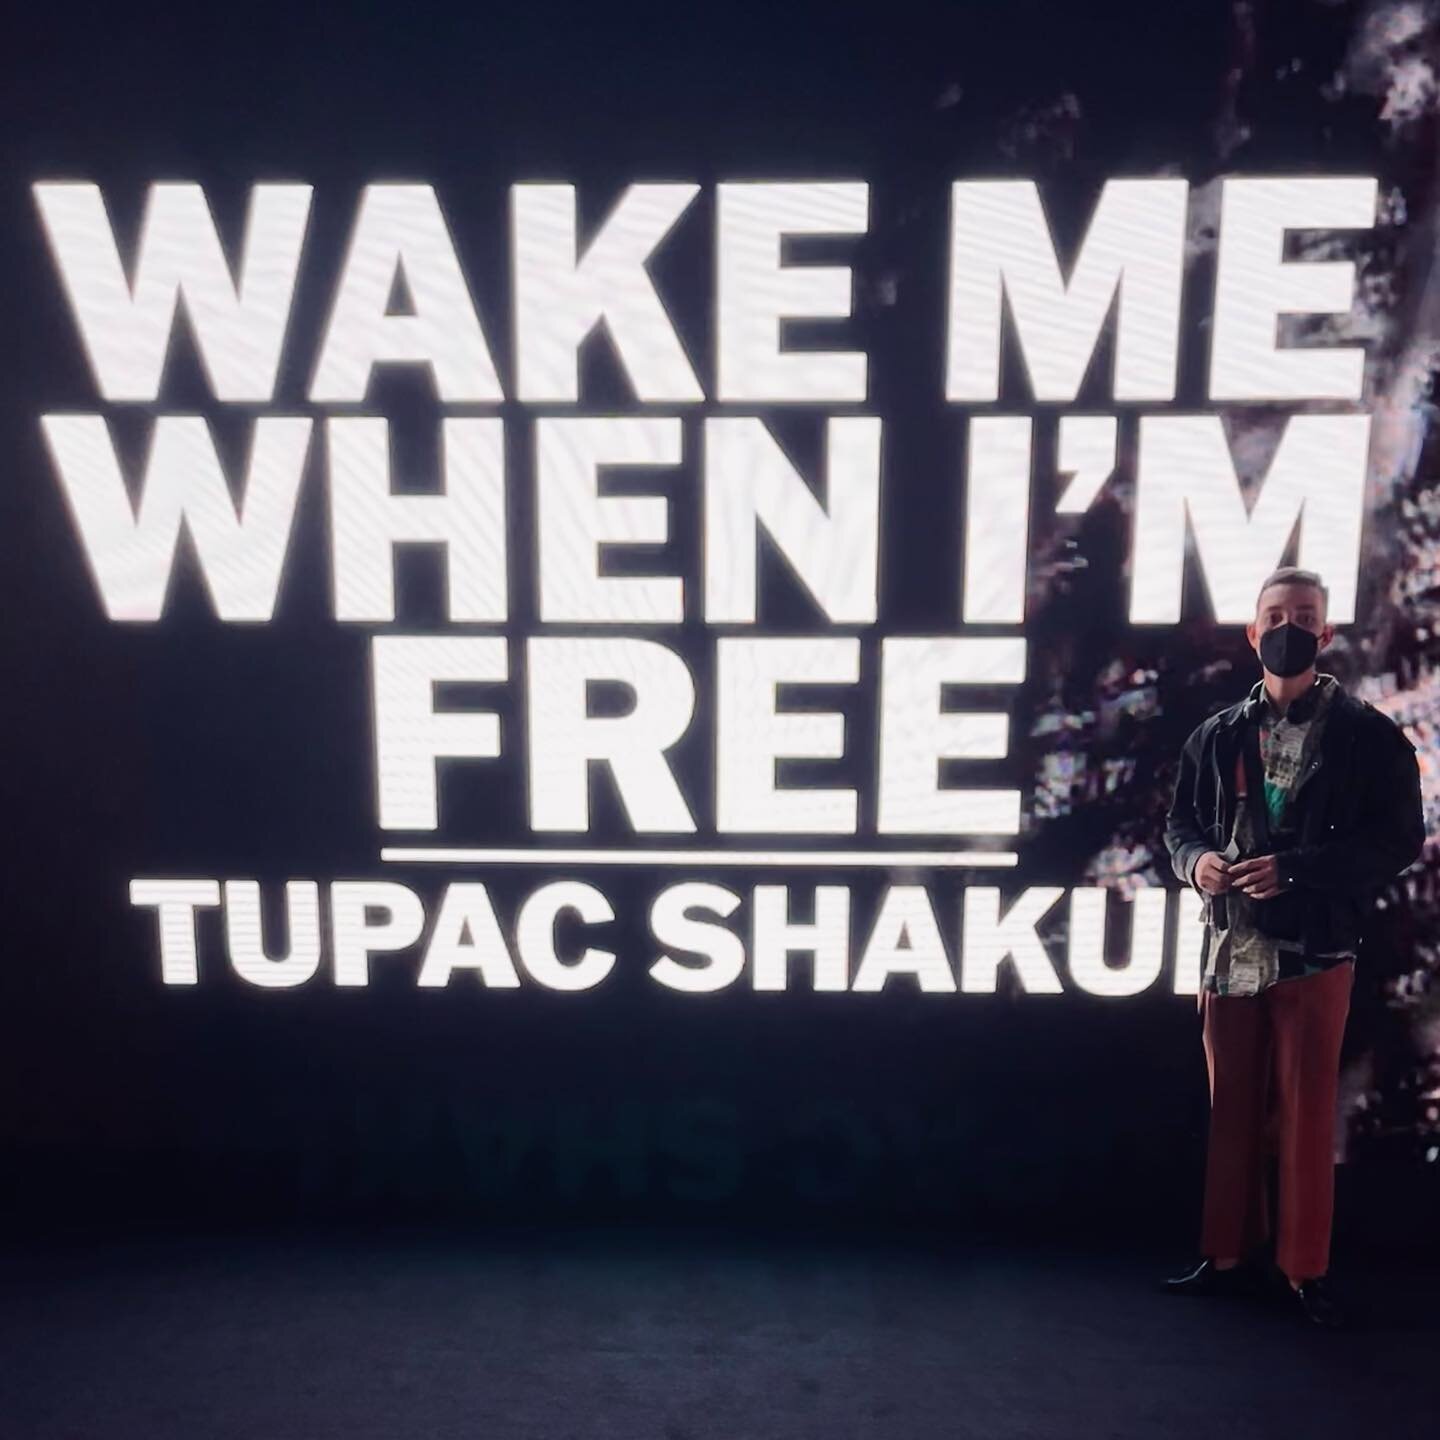 Please do yourself a favor and check out this exhibit that explores the life and legacy of Tupac Shakur before it's gone. I'm still mind blown. Y'all honored the ancestors @nwaka.onwusa 🕯. #tupacshakur #wakemewhenimfree